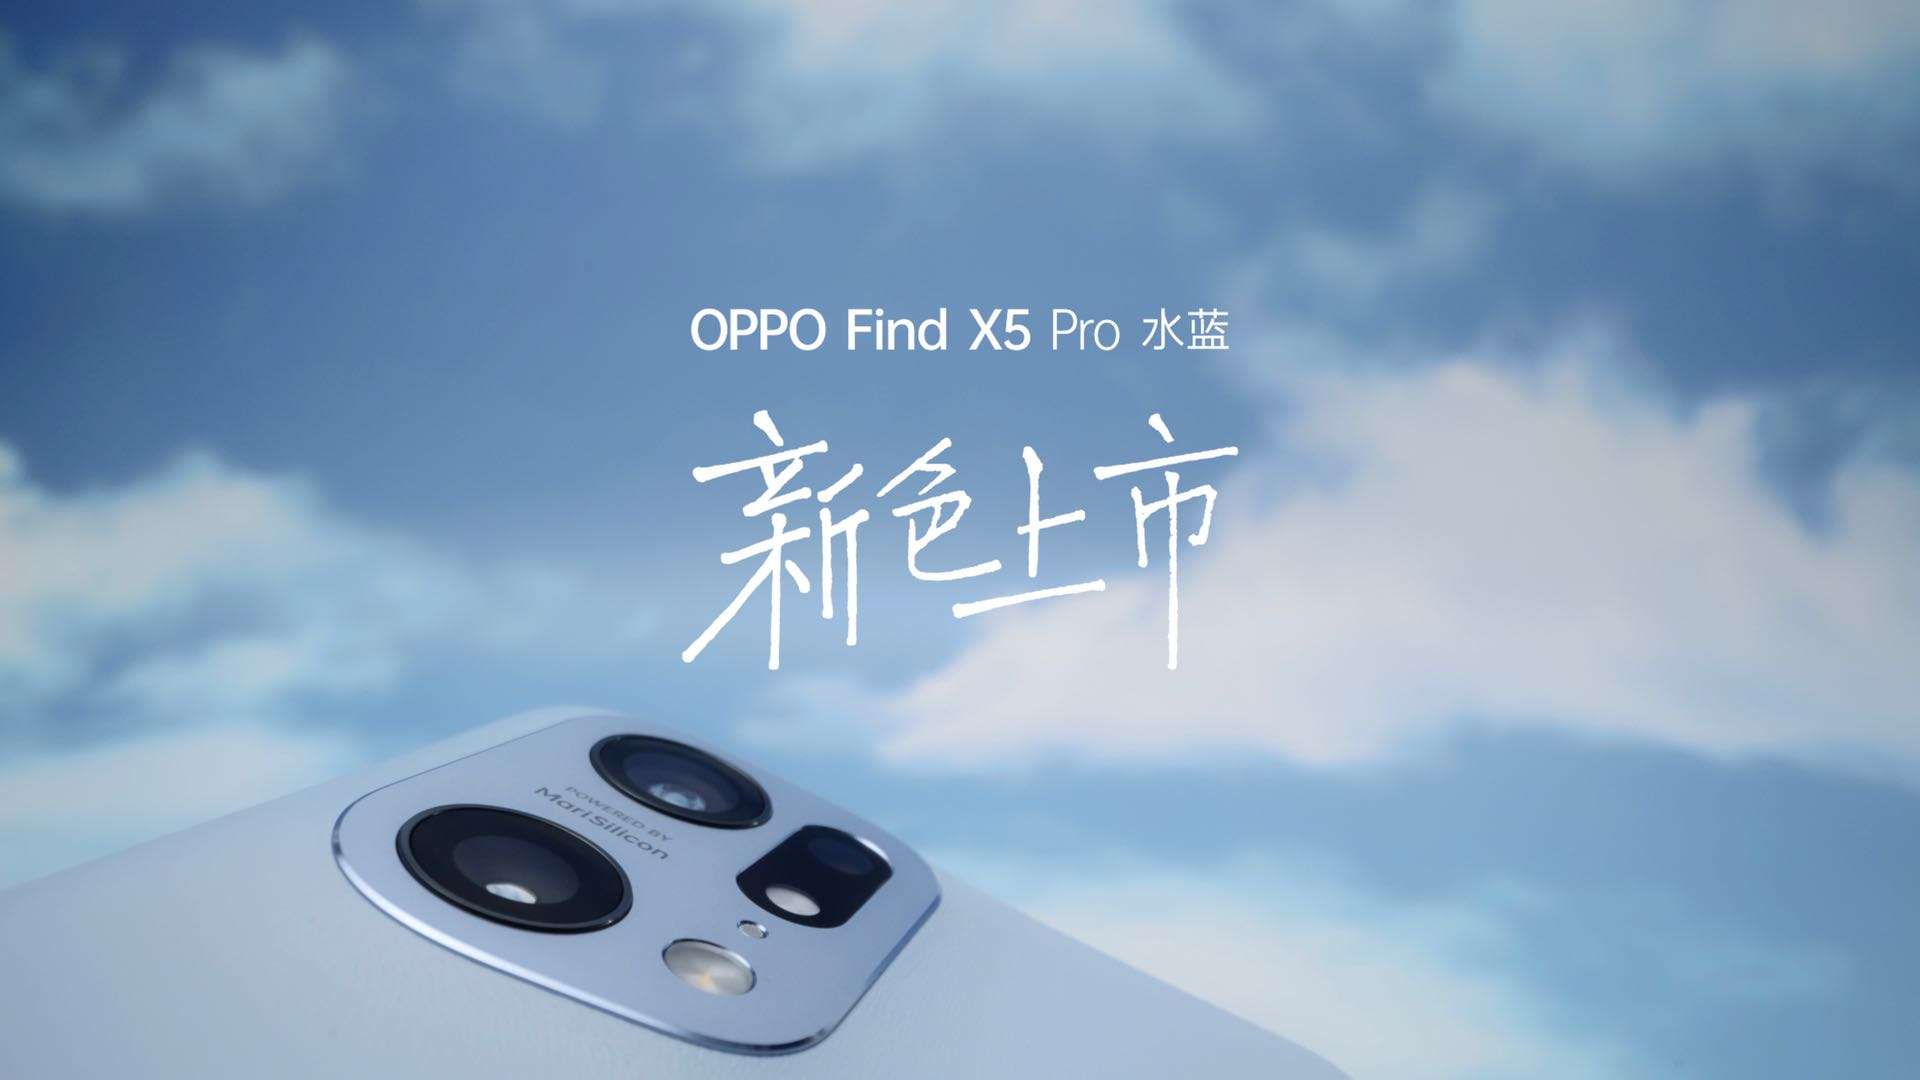 OPPO Find X5 Pro 水蓝 外观视频